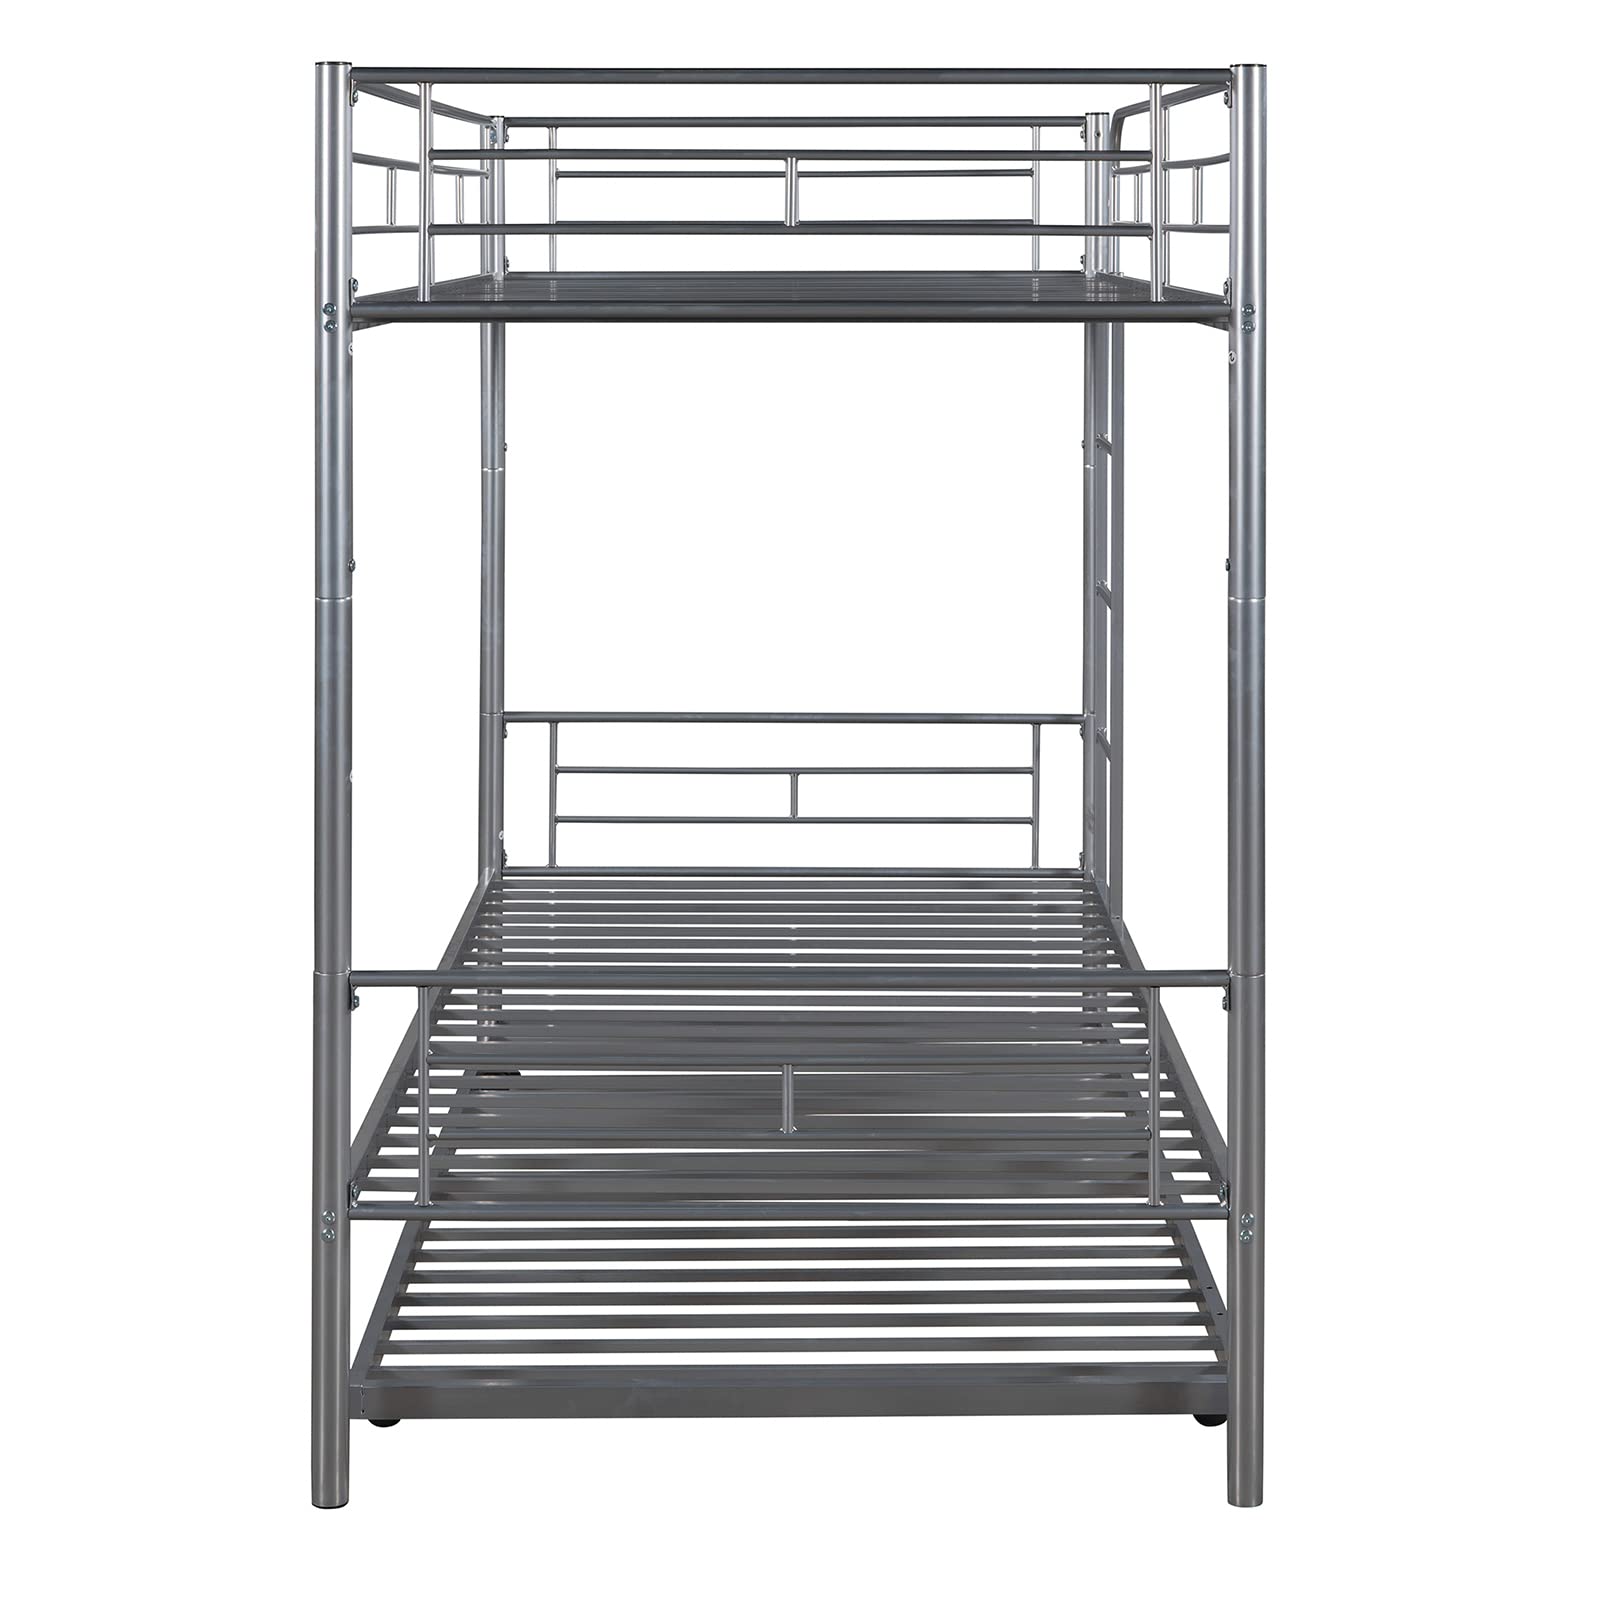 Lostcat Twin Over Twin Bunk Bed with Trundle,Heavy Duty Twin Size Bunk Beds Frame with Safety Guardrails and ladders,Can be Divided Into Two Beds,for Kids/Teen/Adults,No Box Spring Needed,Silver